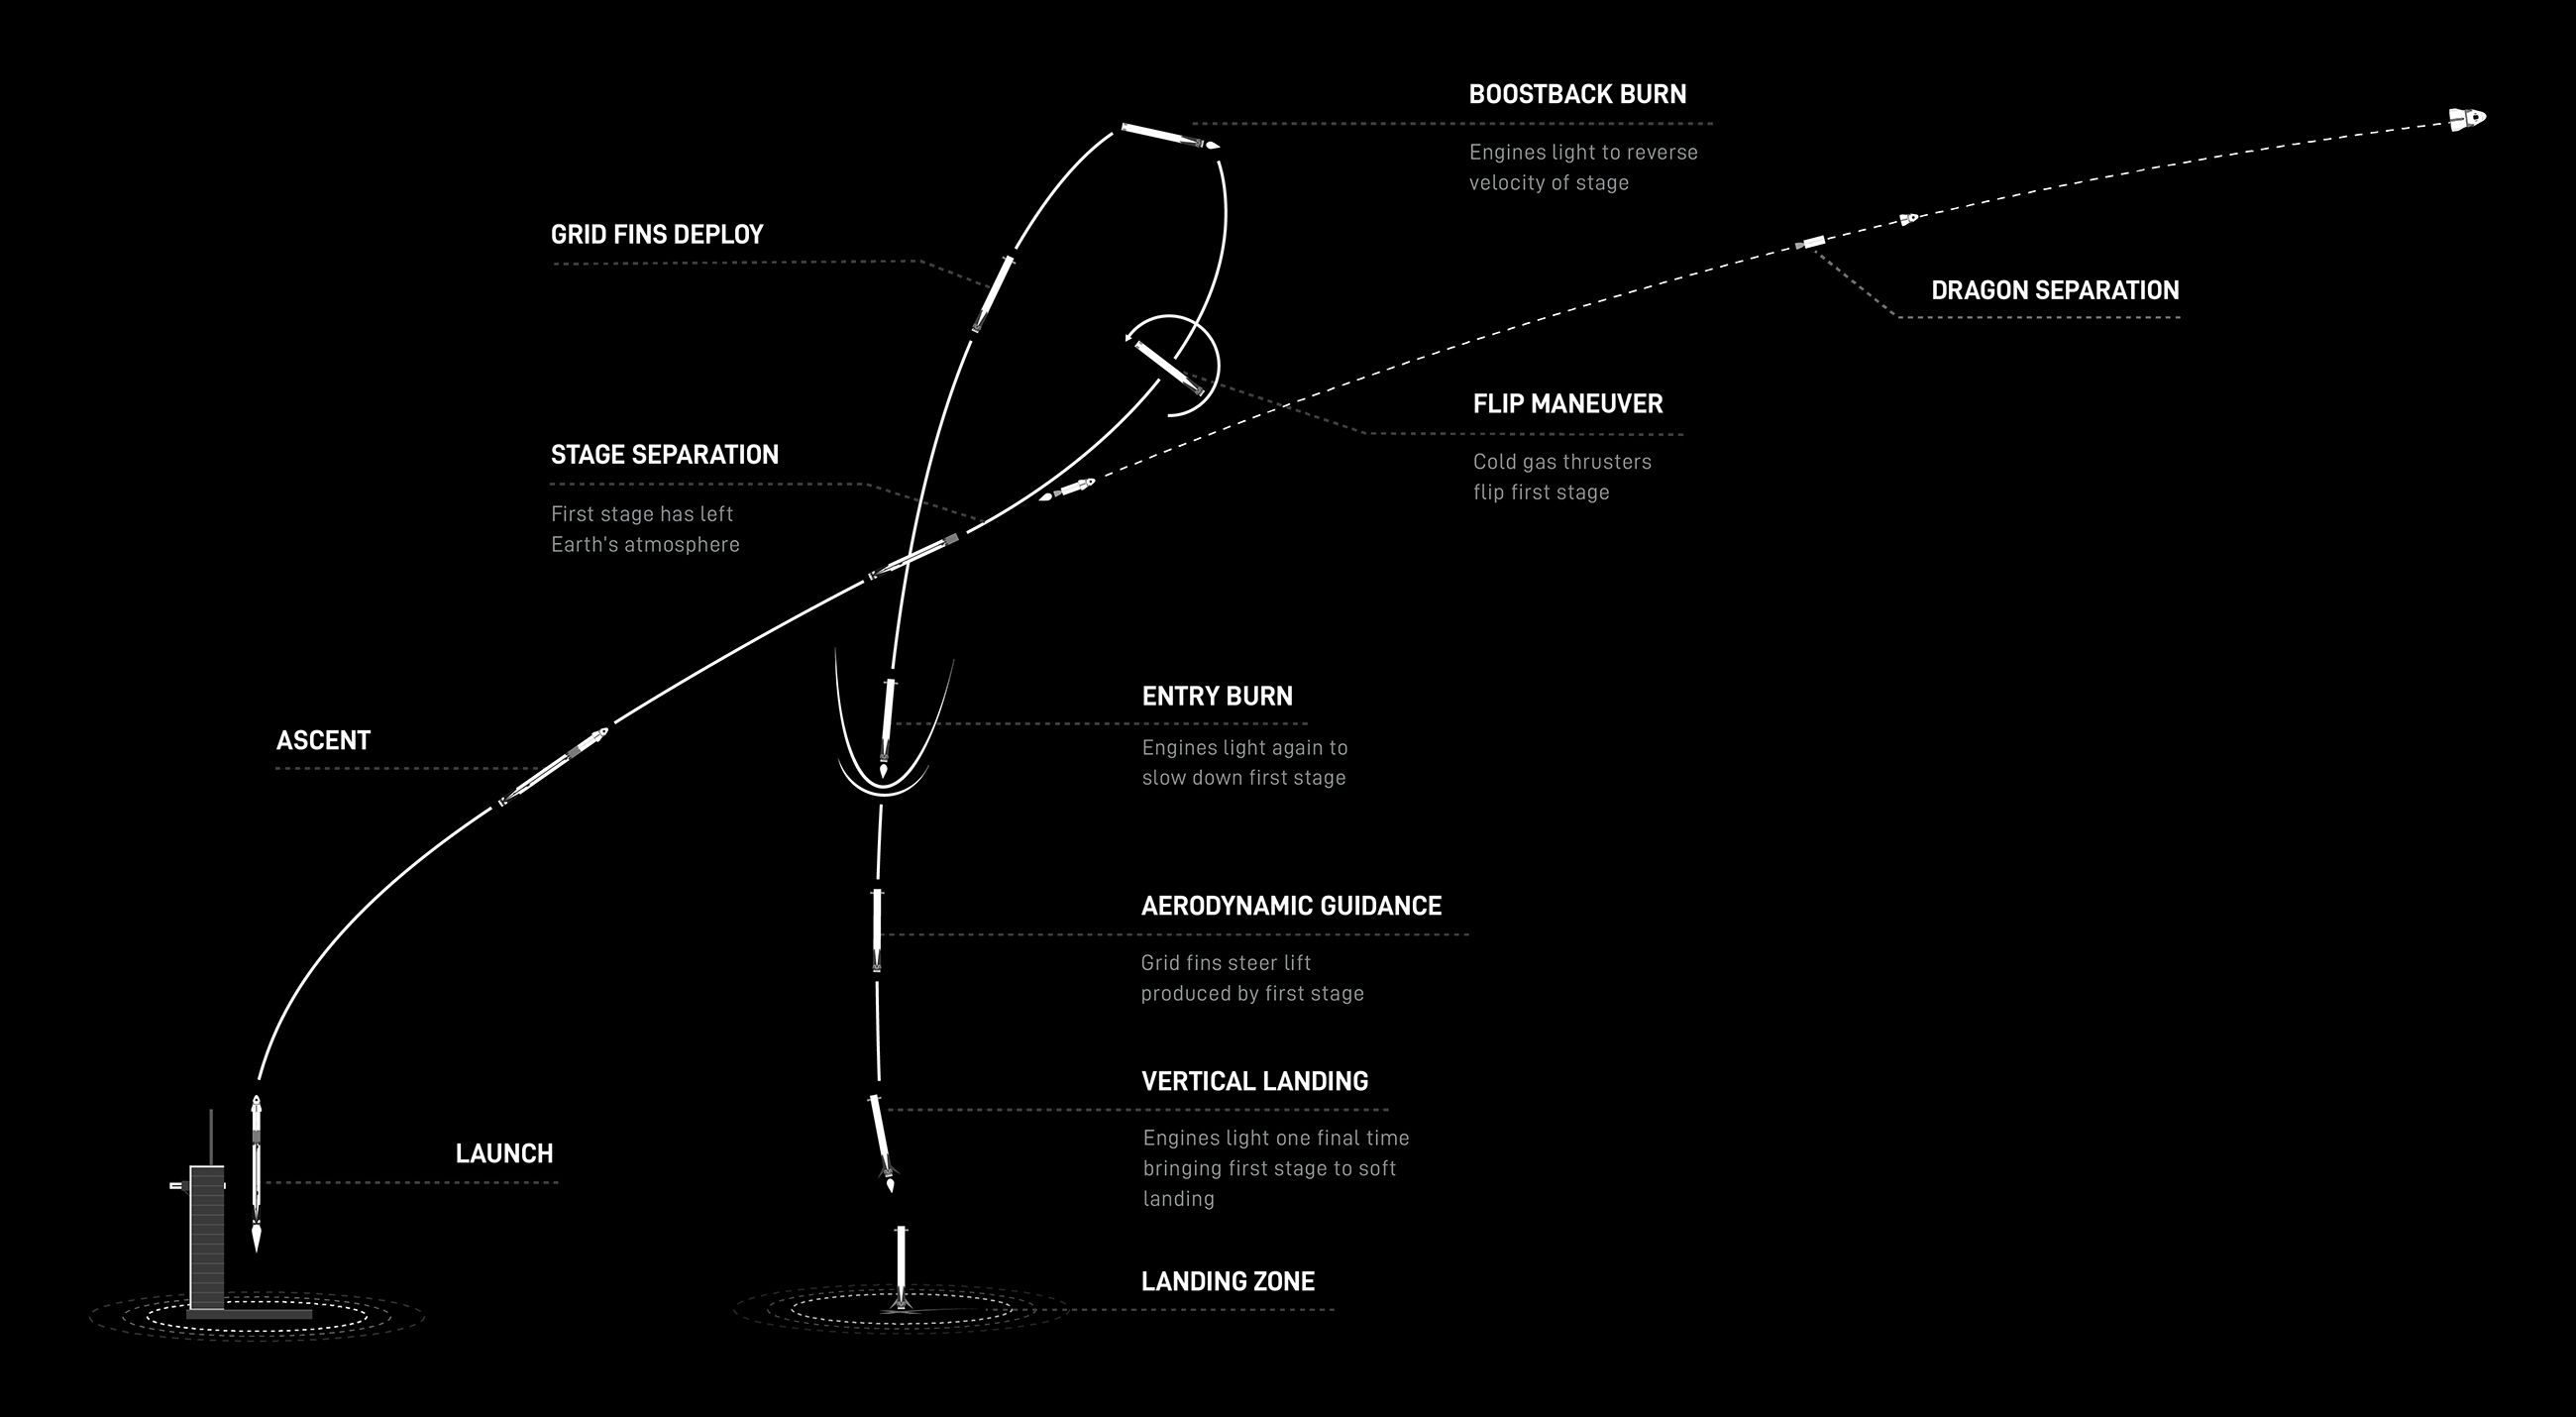 SpaceX diagram of the Ax-2 astronaut launch showing liftoff, rocket landing and separation.